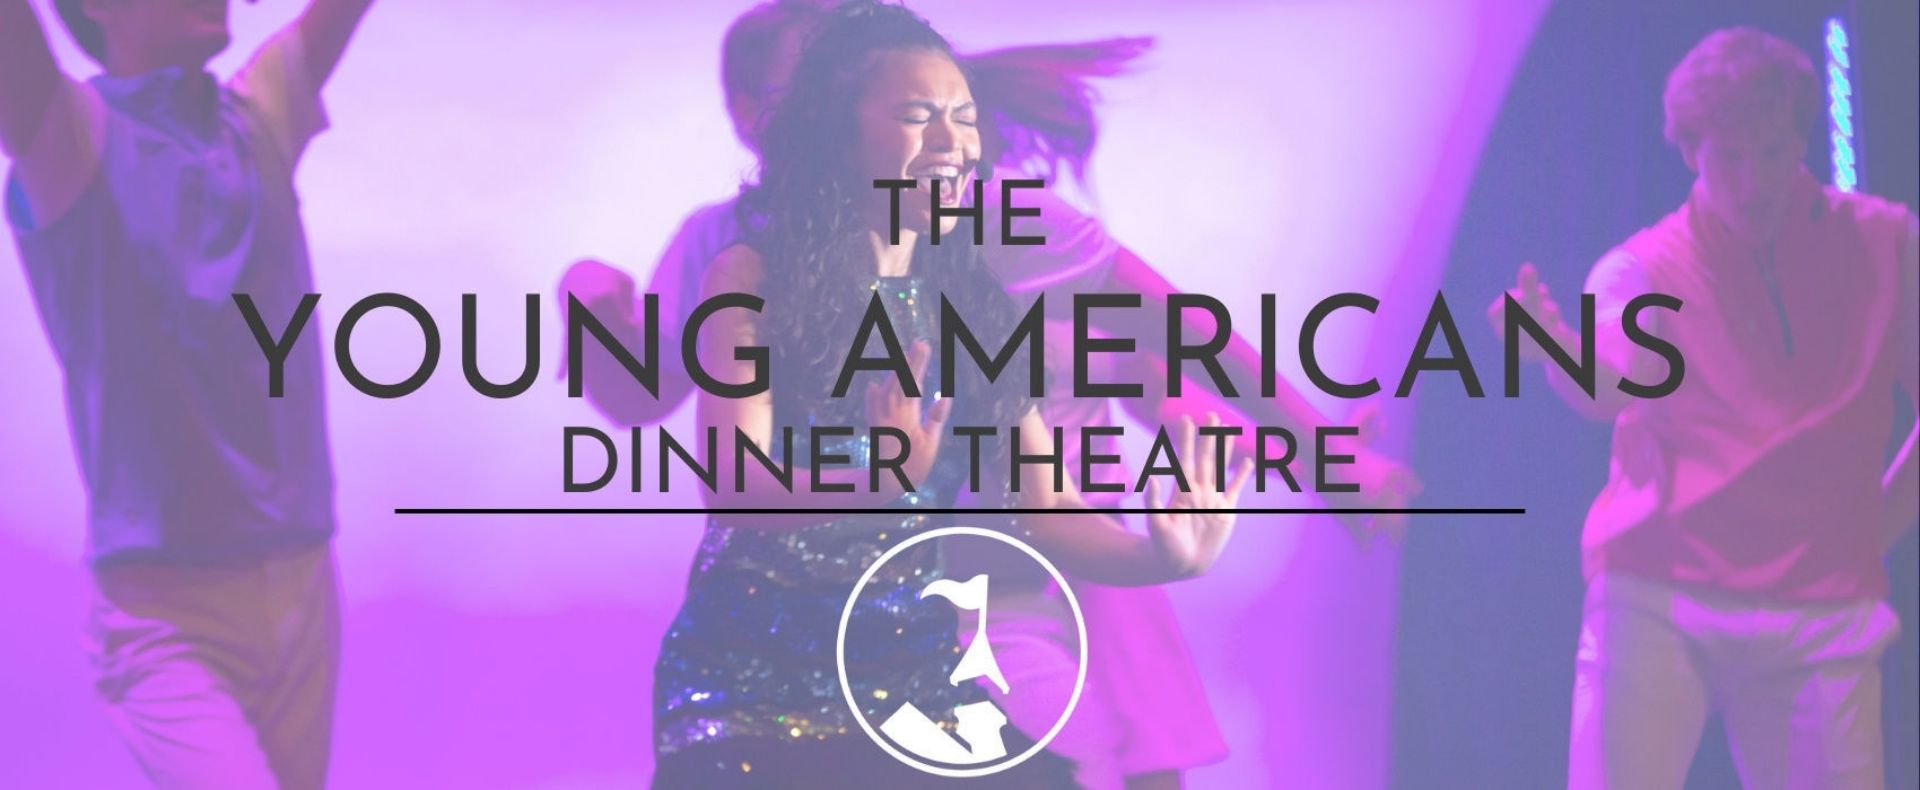 The Young Americans Dinner Theatre at The Highlands	